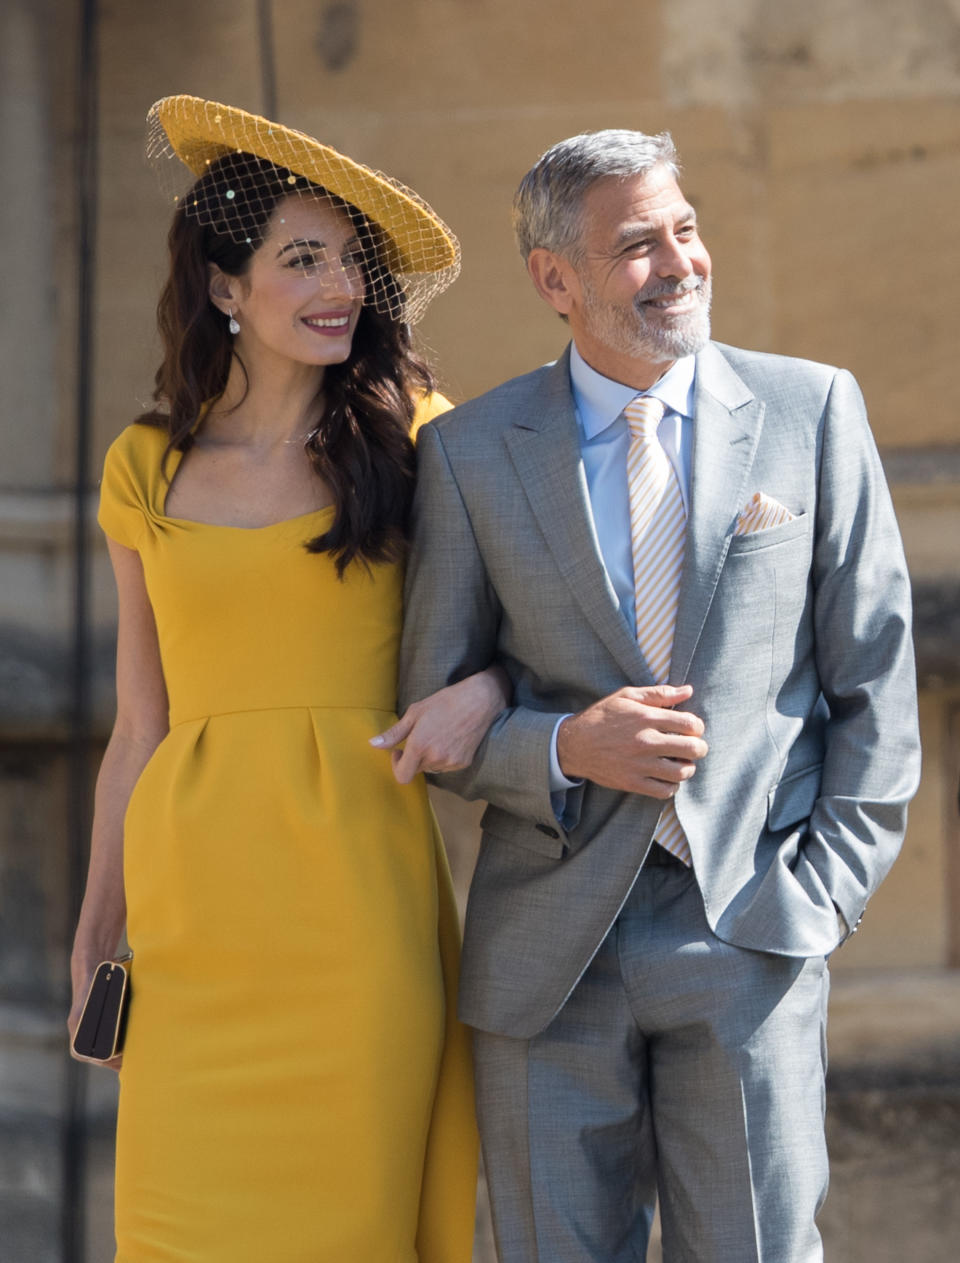 George Clooney and wife Amal Clooney at Meghan and Harry’s royal wedding in May last year. Source: Getty